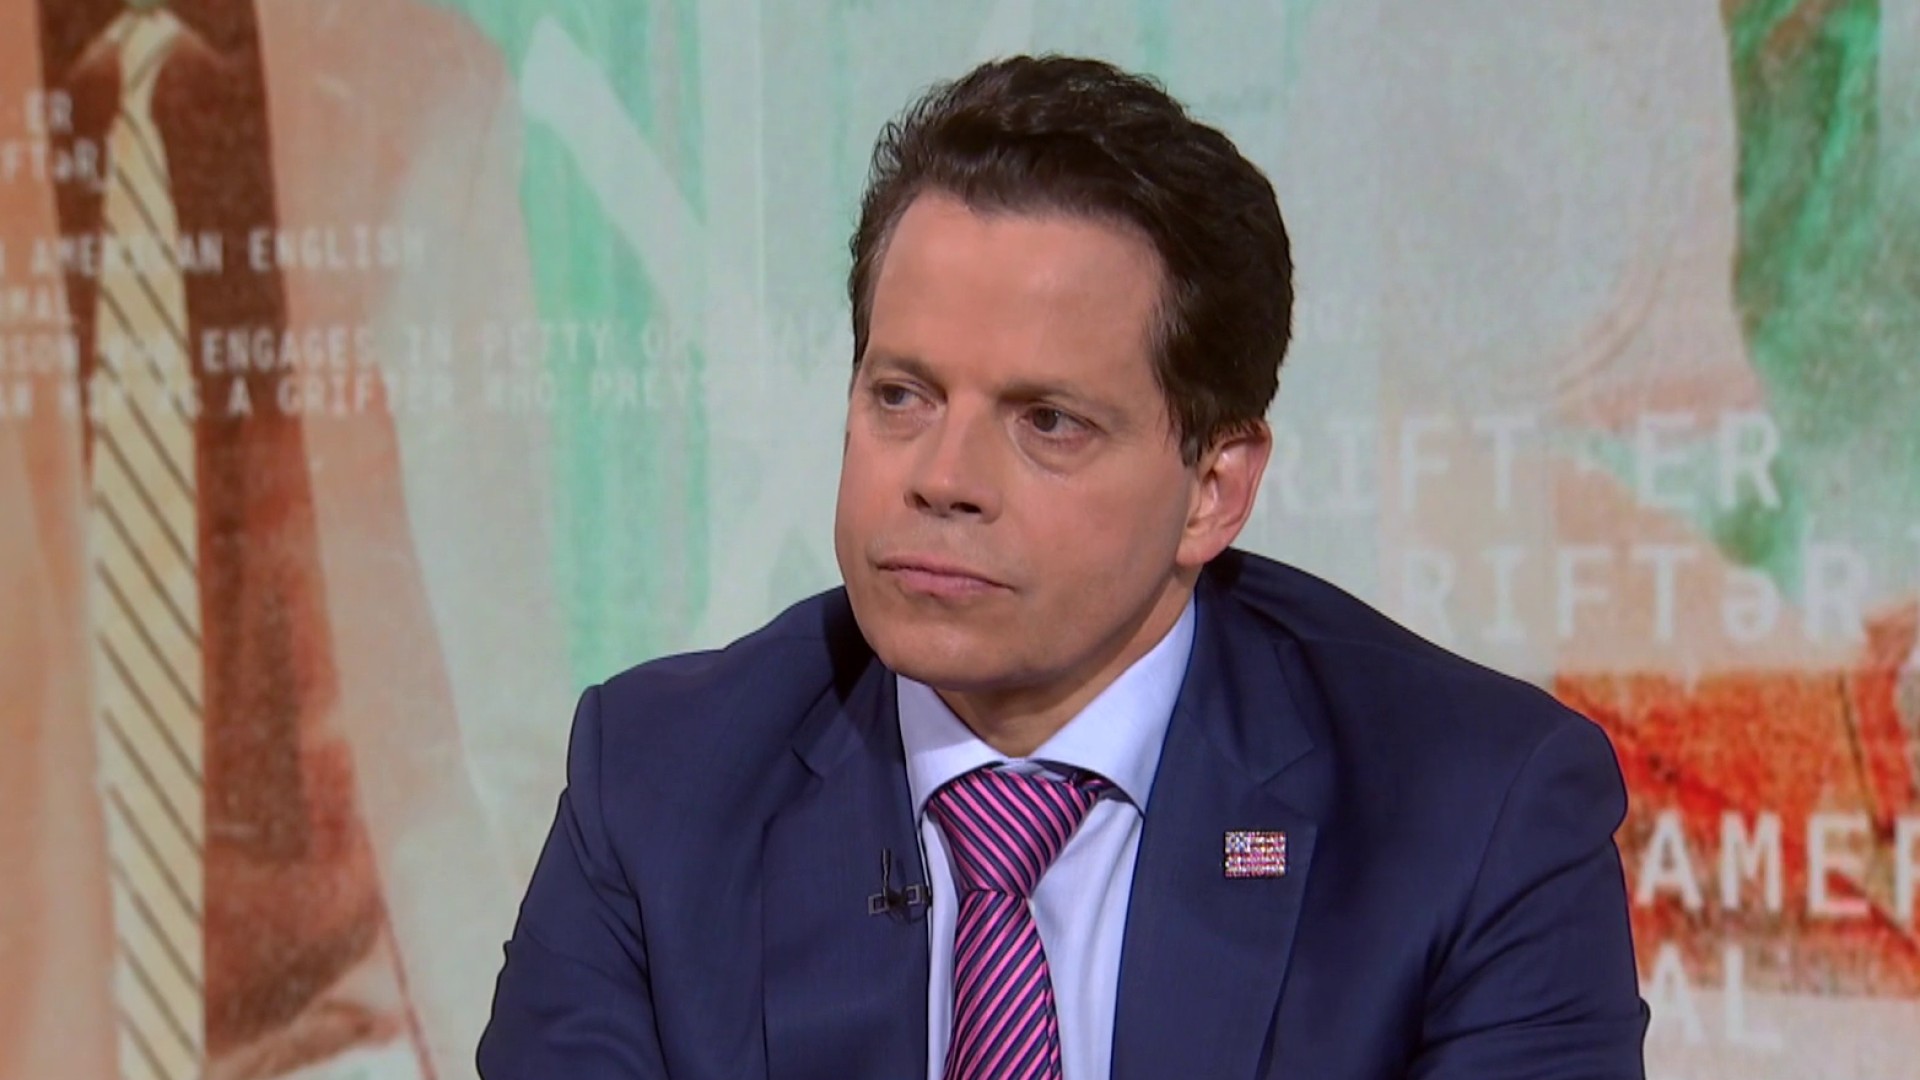 Trump is a ‘grifter’ and engages in ‘political sociopathic behavior,’ says Anthony Scaramucci